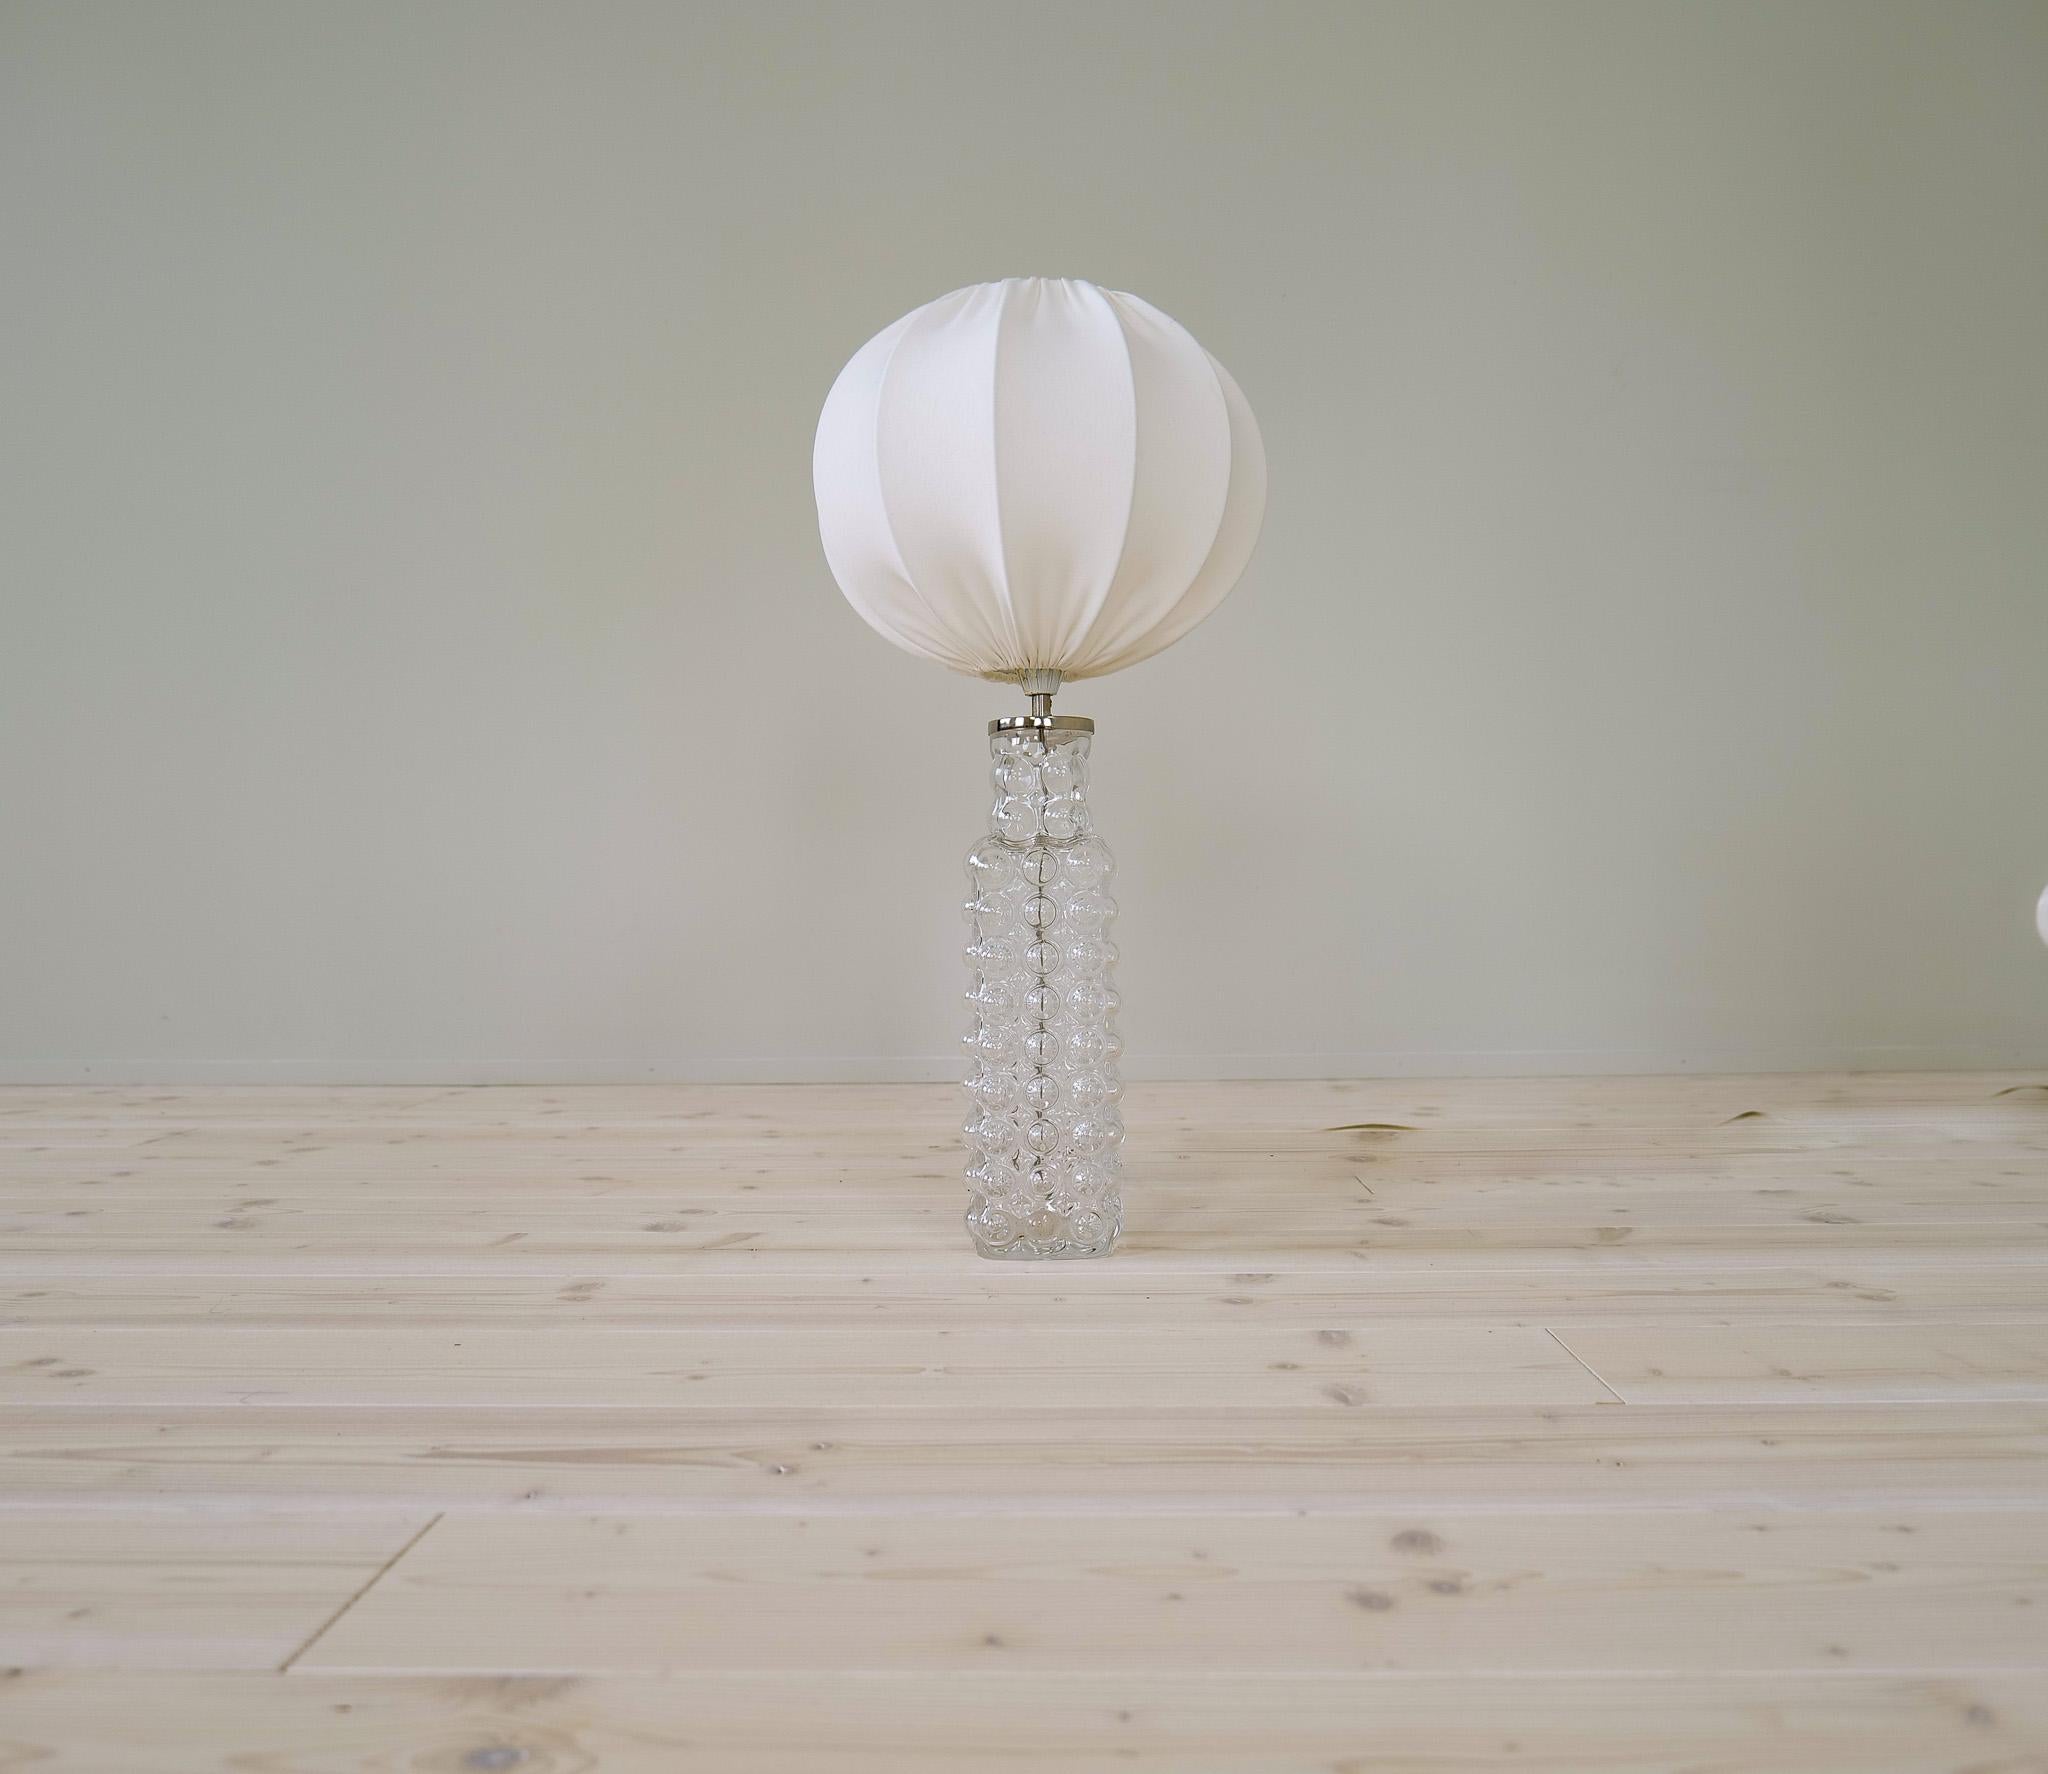 Midcentury large and rare modern bubble/drop table lamp design by Carl Fagerlund for Orrefors Glasbruk in Sweden.
The bubble crystal glass with an all-new cotton shades gives a great modern look. 

Good condition.

Dimensions: height: 24.2 in